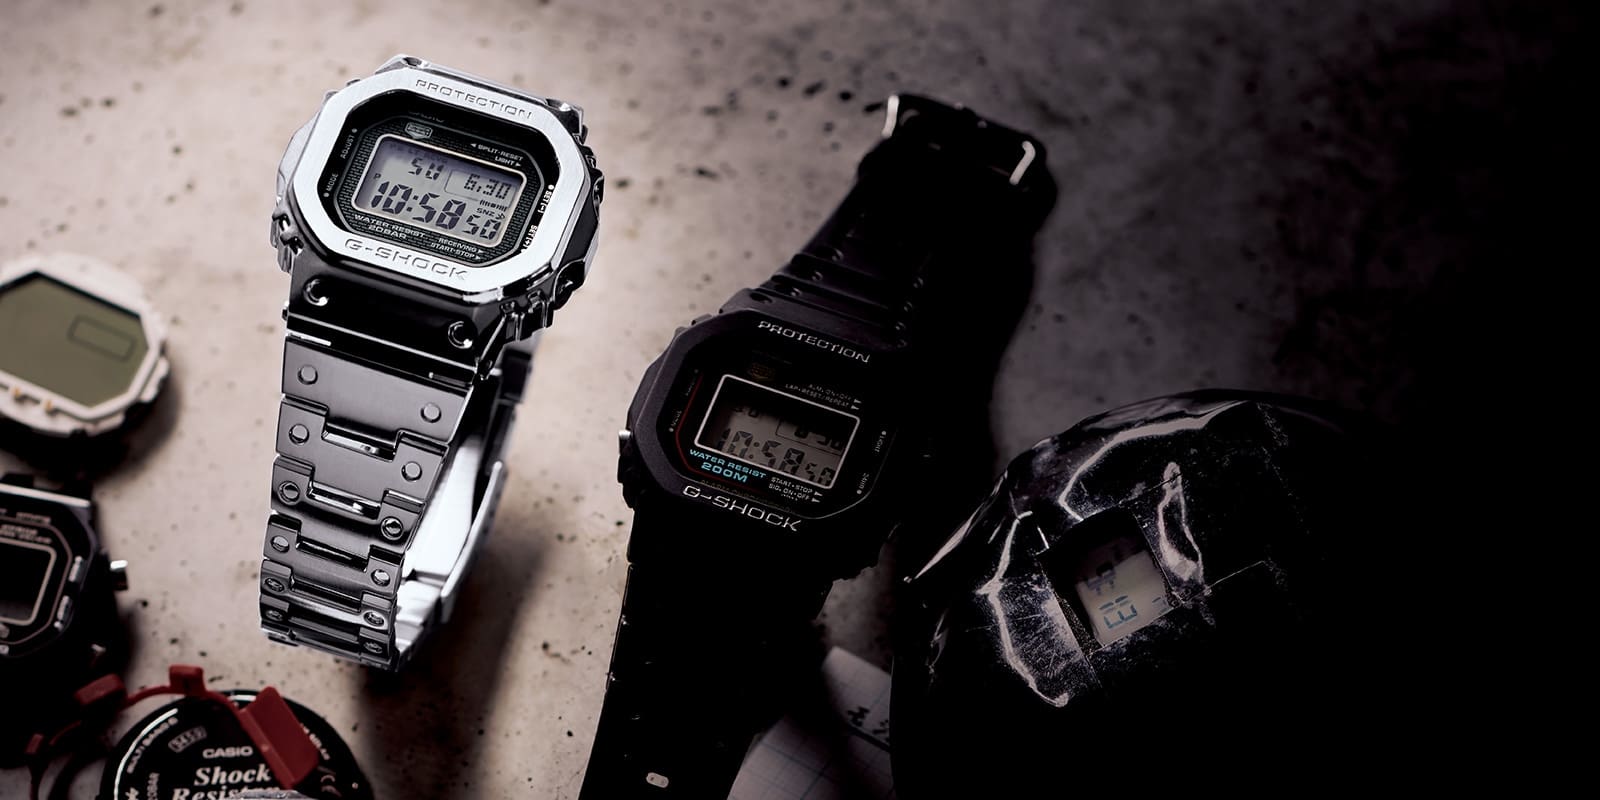 GMWB5000 and DW5000 series watches on a work table with various parts